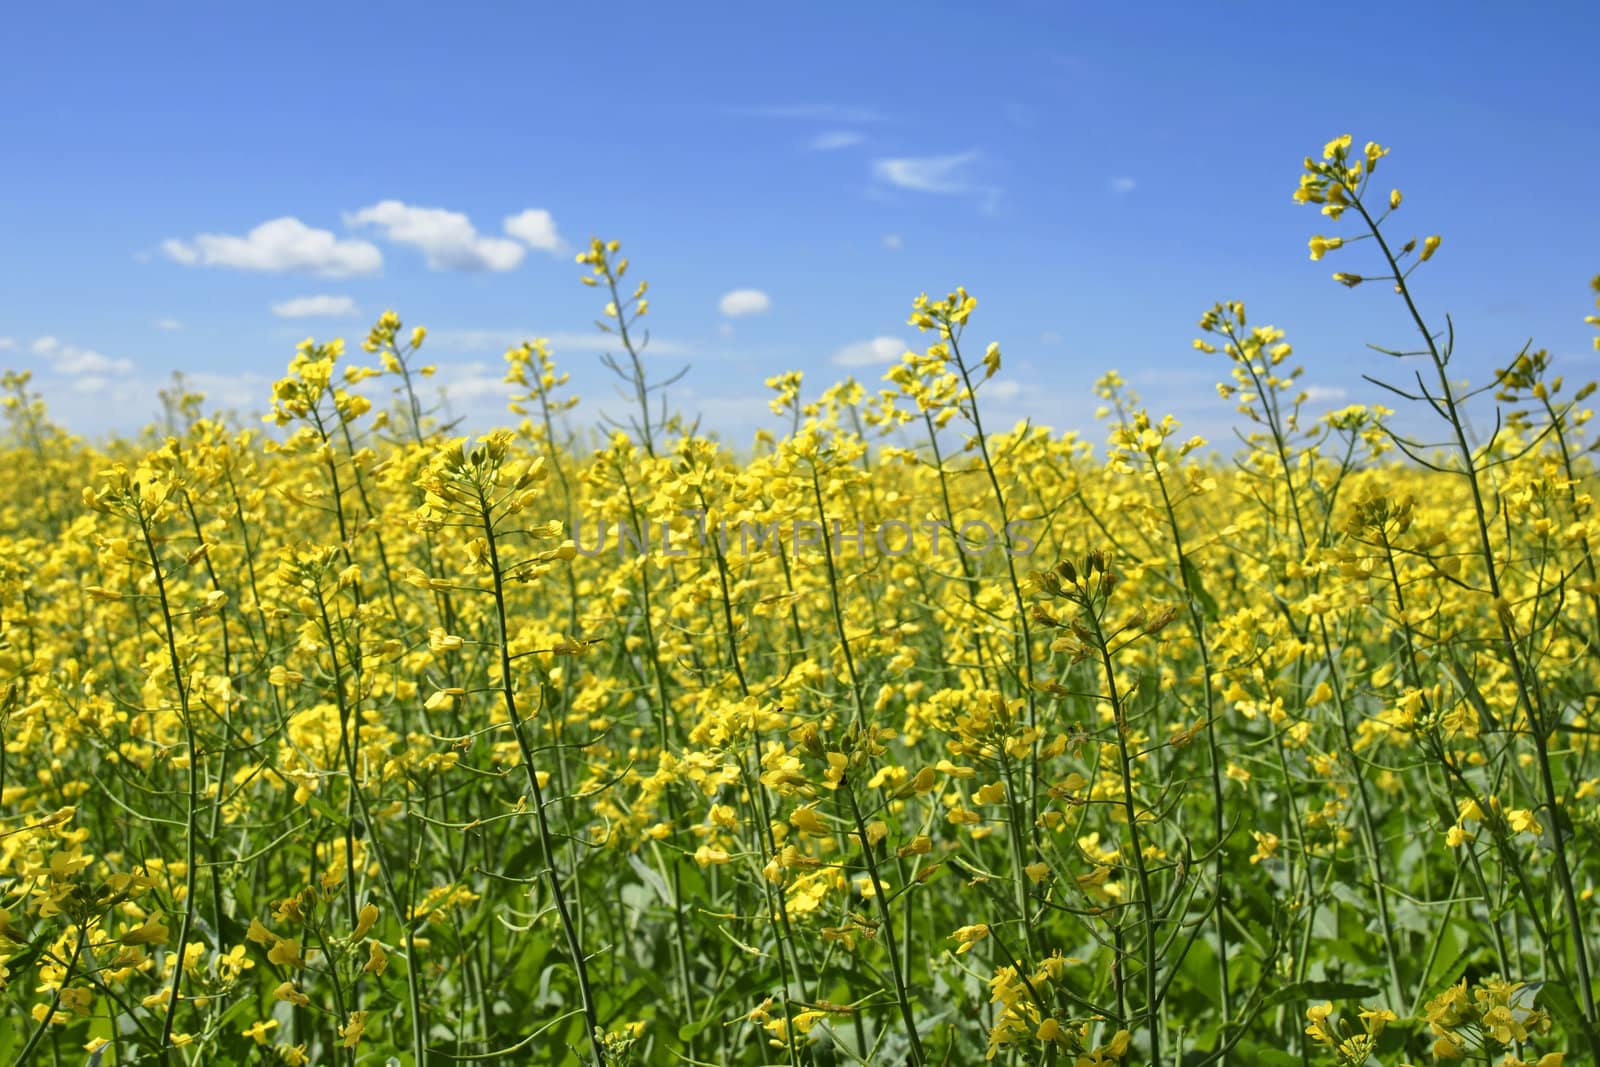 Beautiful field of canola, rapeseed or colza in yellow bloom on a sunny day, perfect rural scene or agriculture background.